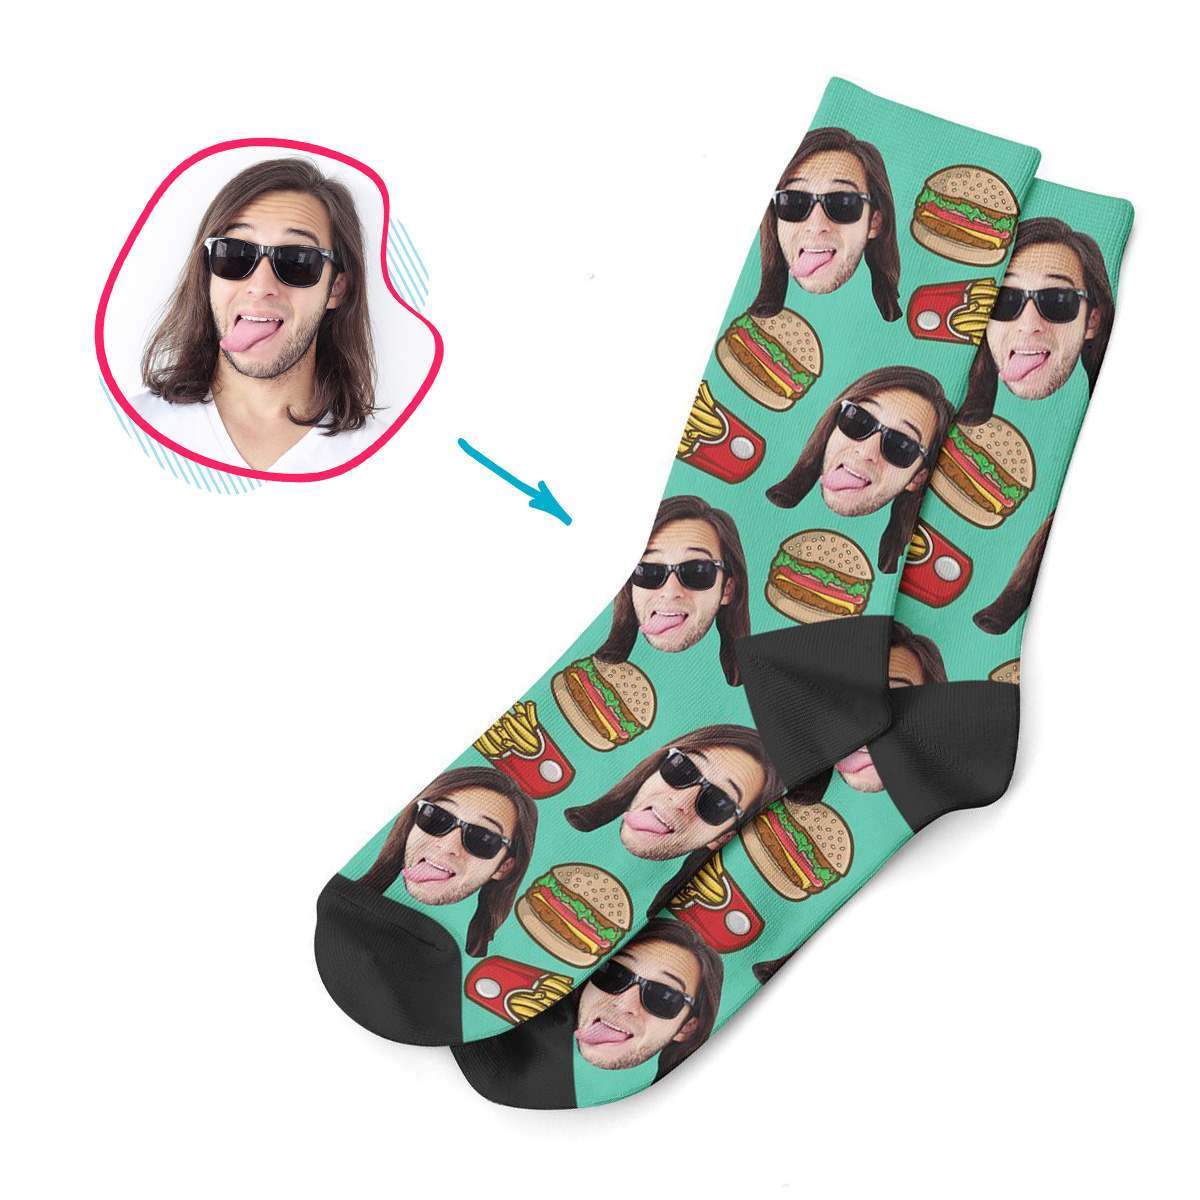 mint Fastfood socks personalized with photo of face printed on them